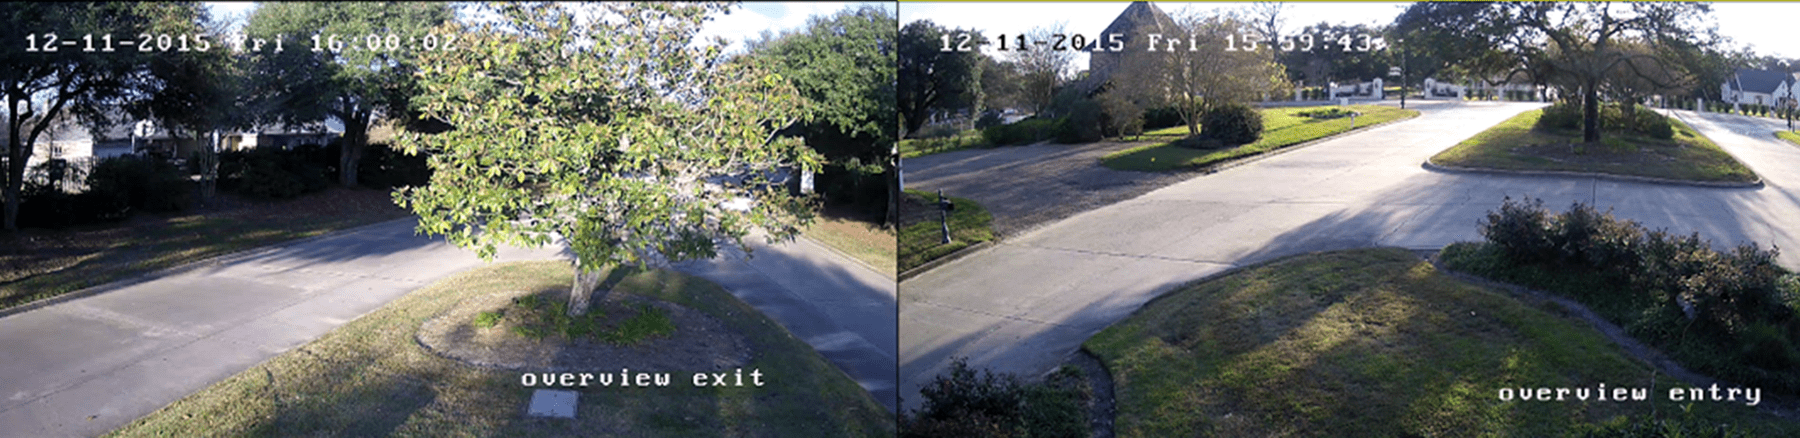 Choosing the right neighborhood cameras can make your home a safer place.